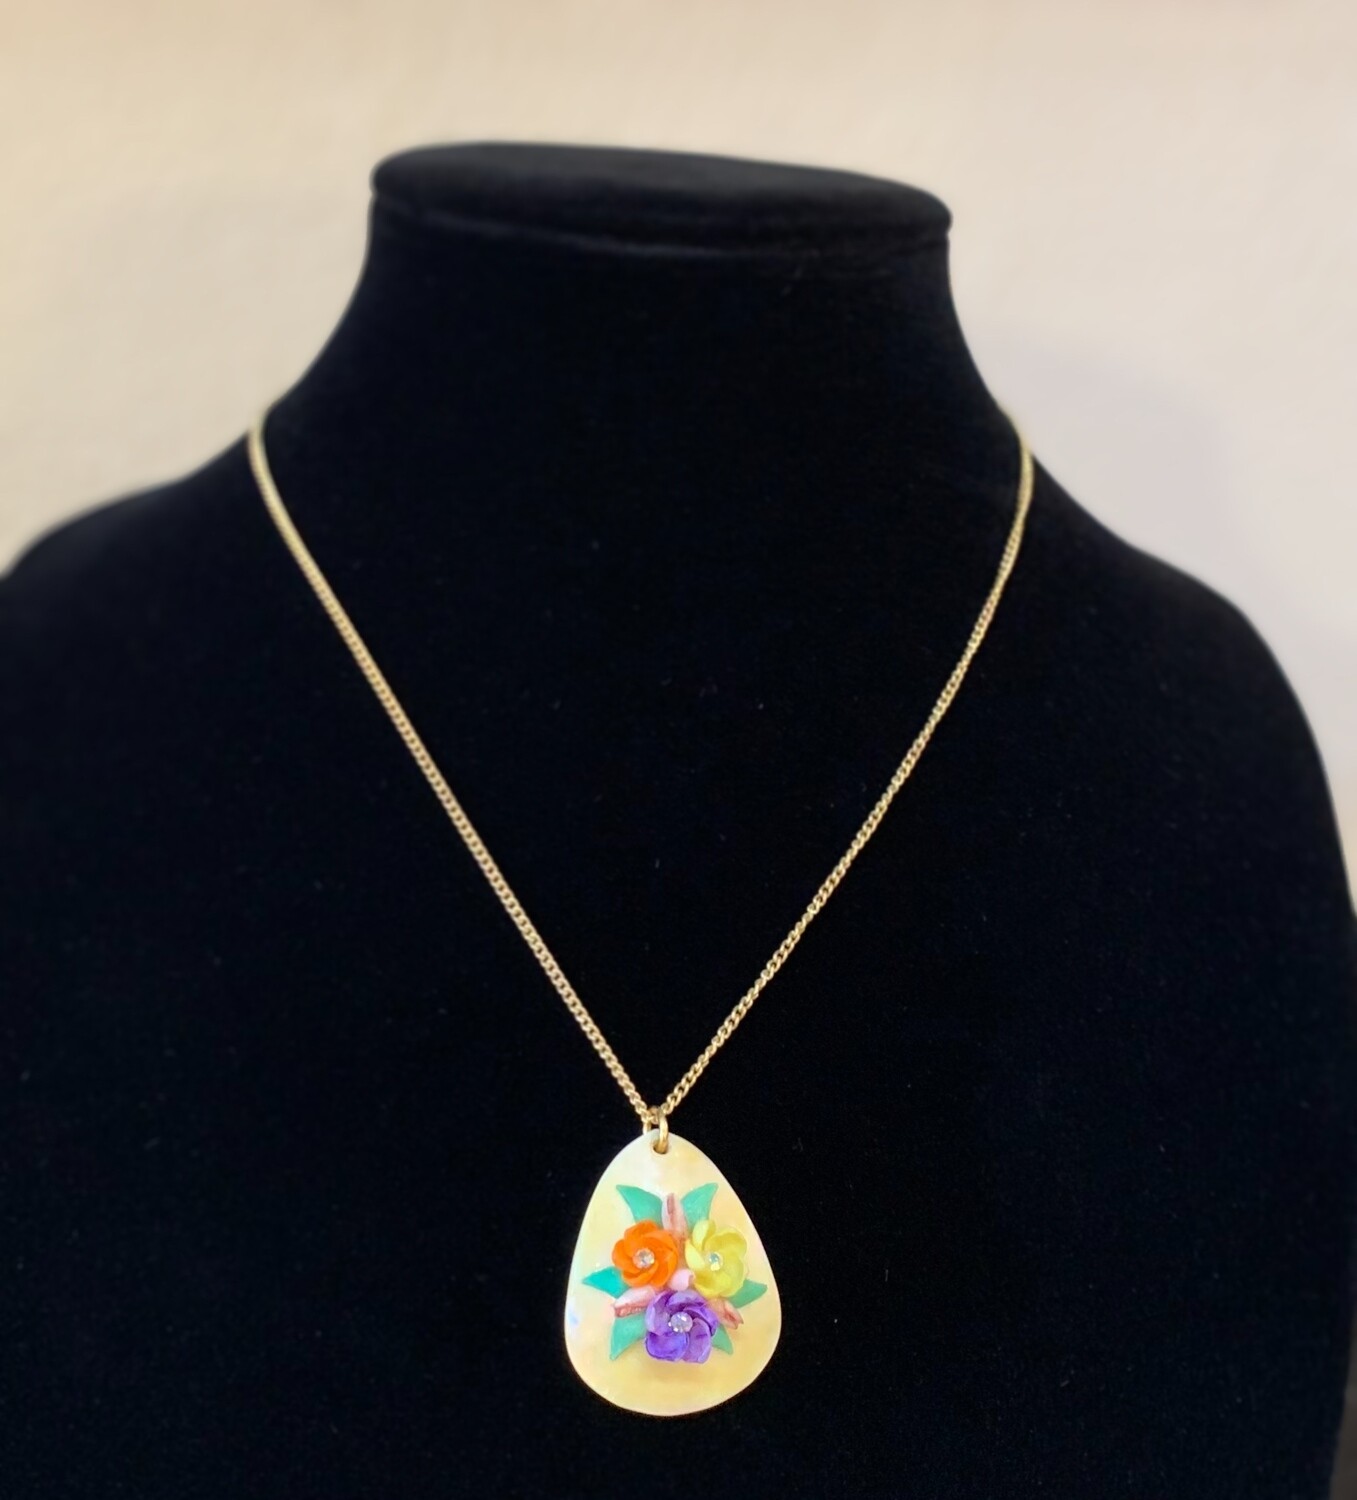 Flowers on Oval Pendant Necklace With Gold Chain